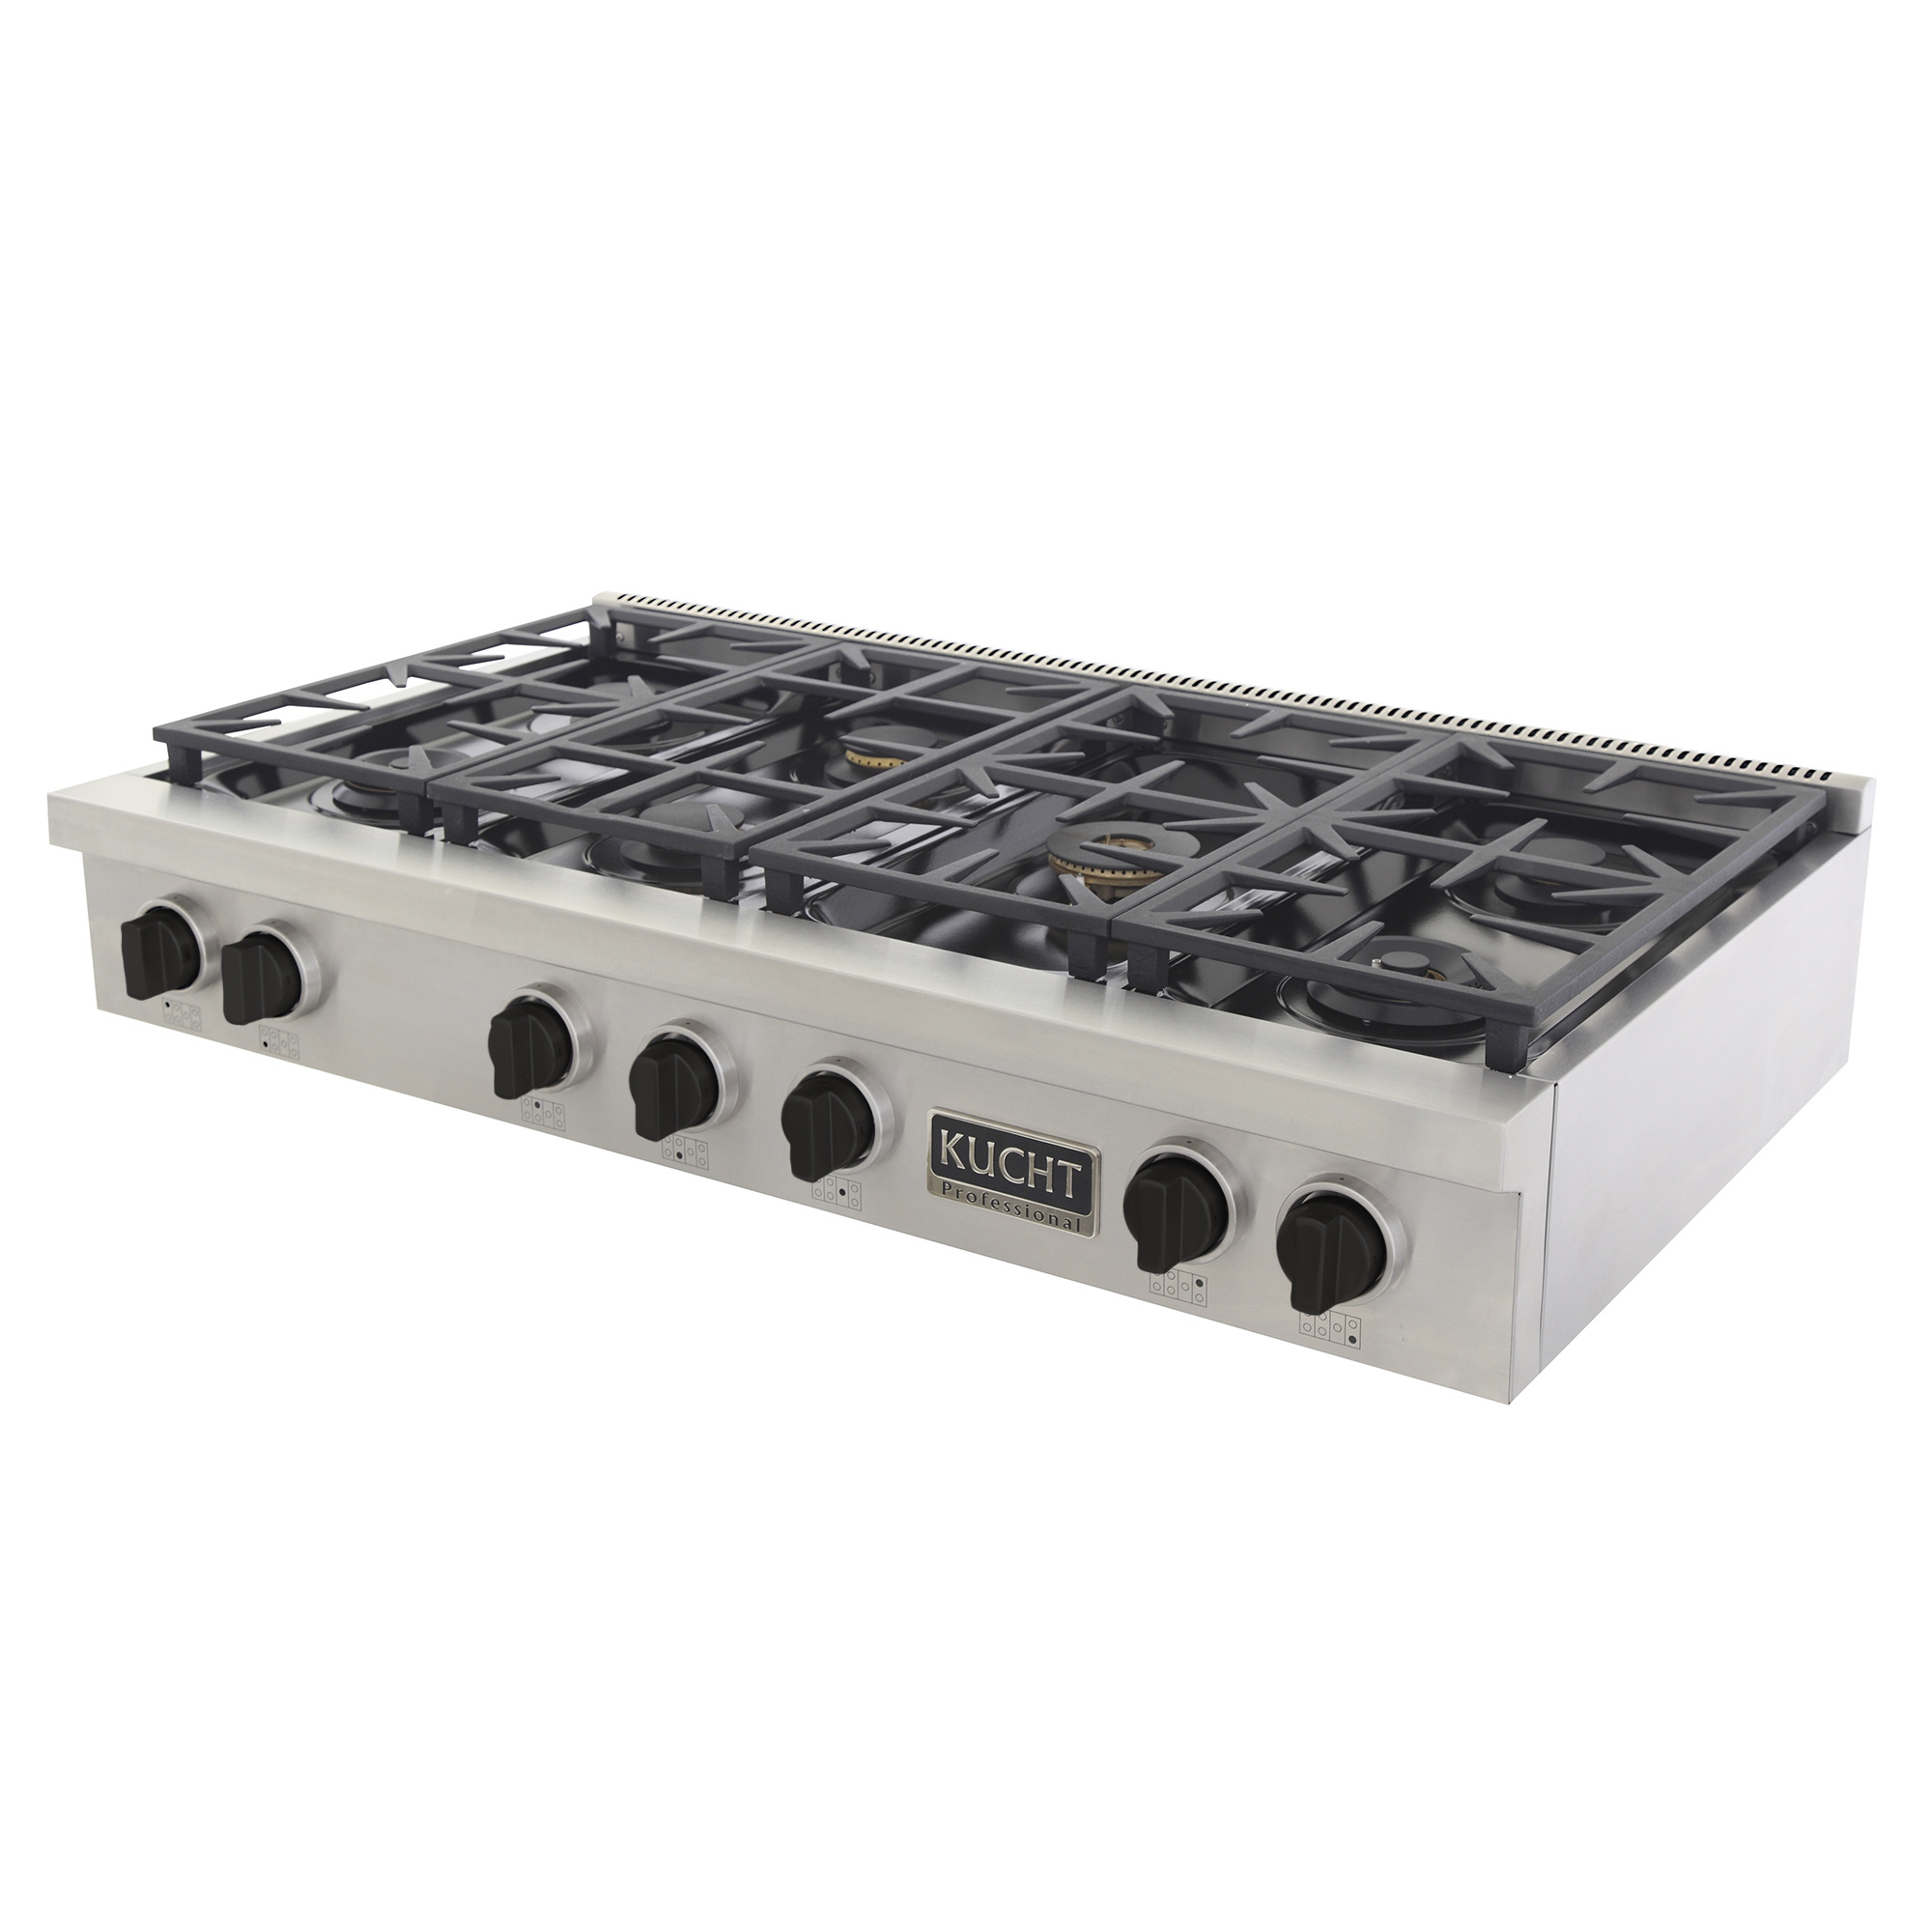 KUCHT Professional 48 in. Natural Gas Range Top with Sealed Burners, in Stainless Steel with Tuxedo Black Knobs